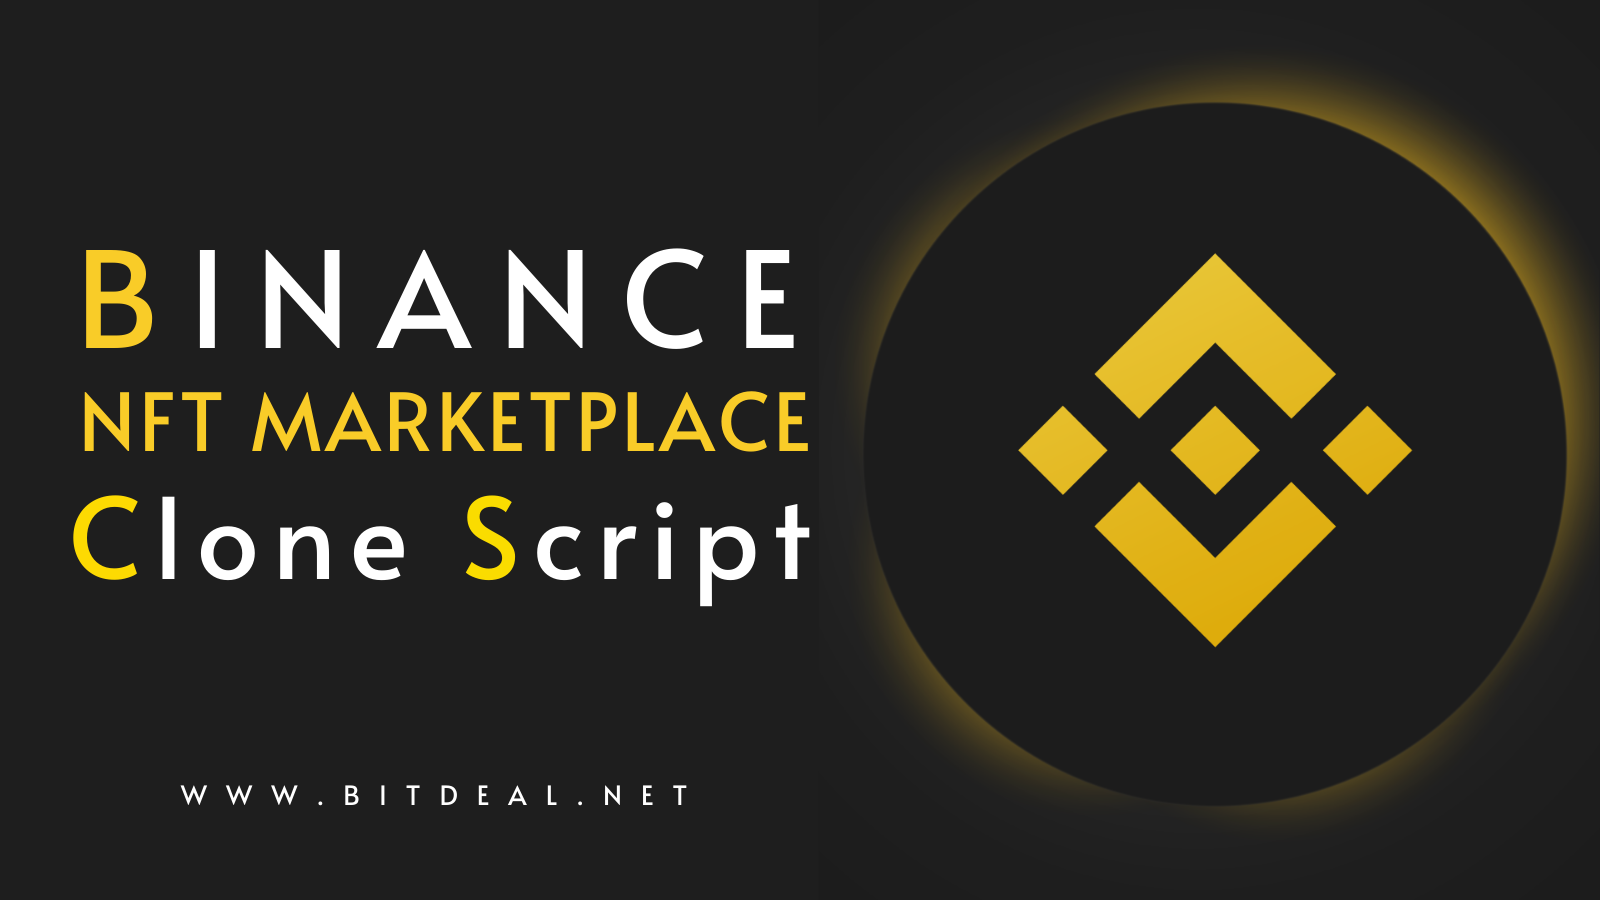 Article about How to Start an NFT Marketplace like Binance NFT